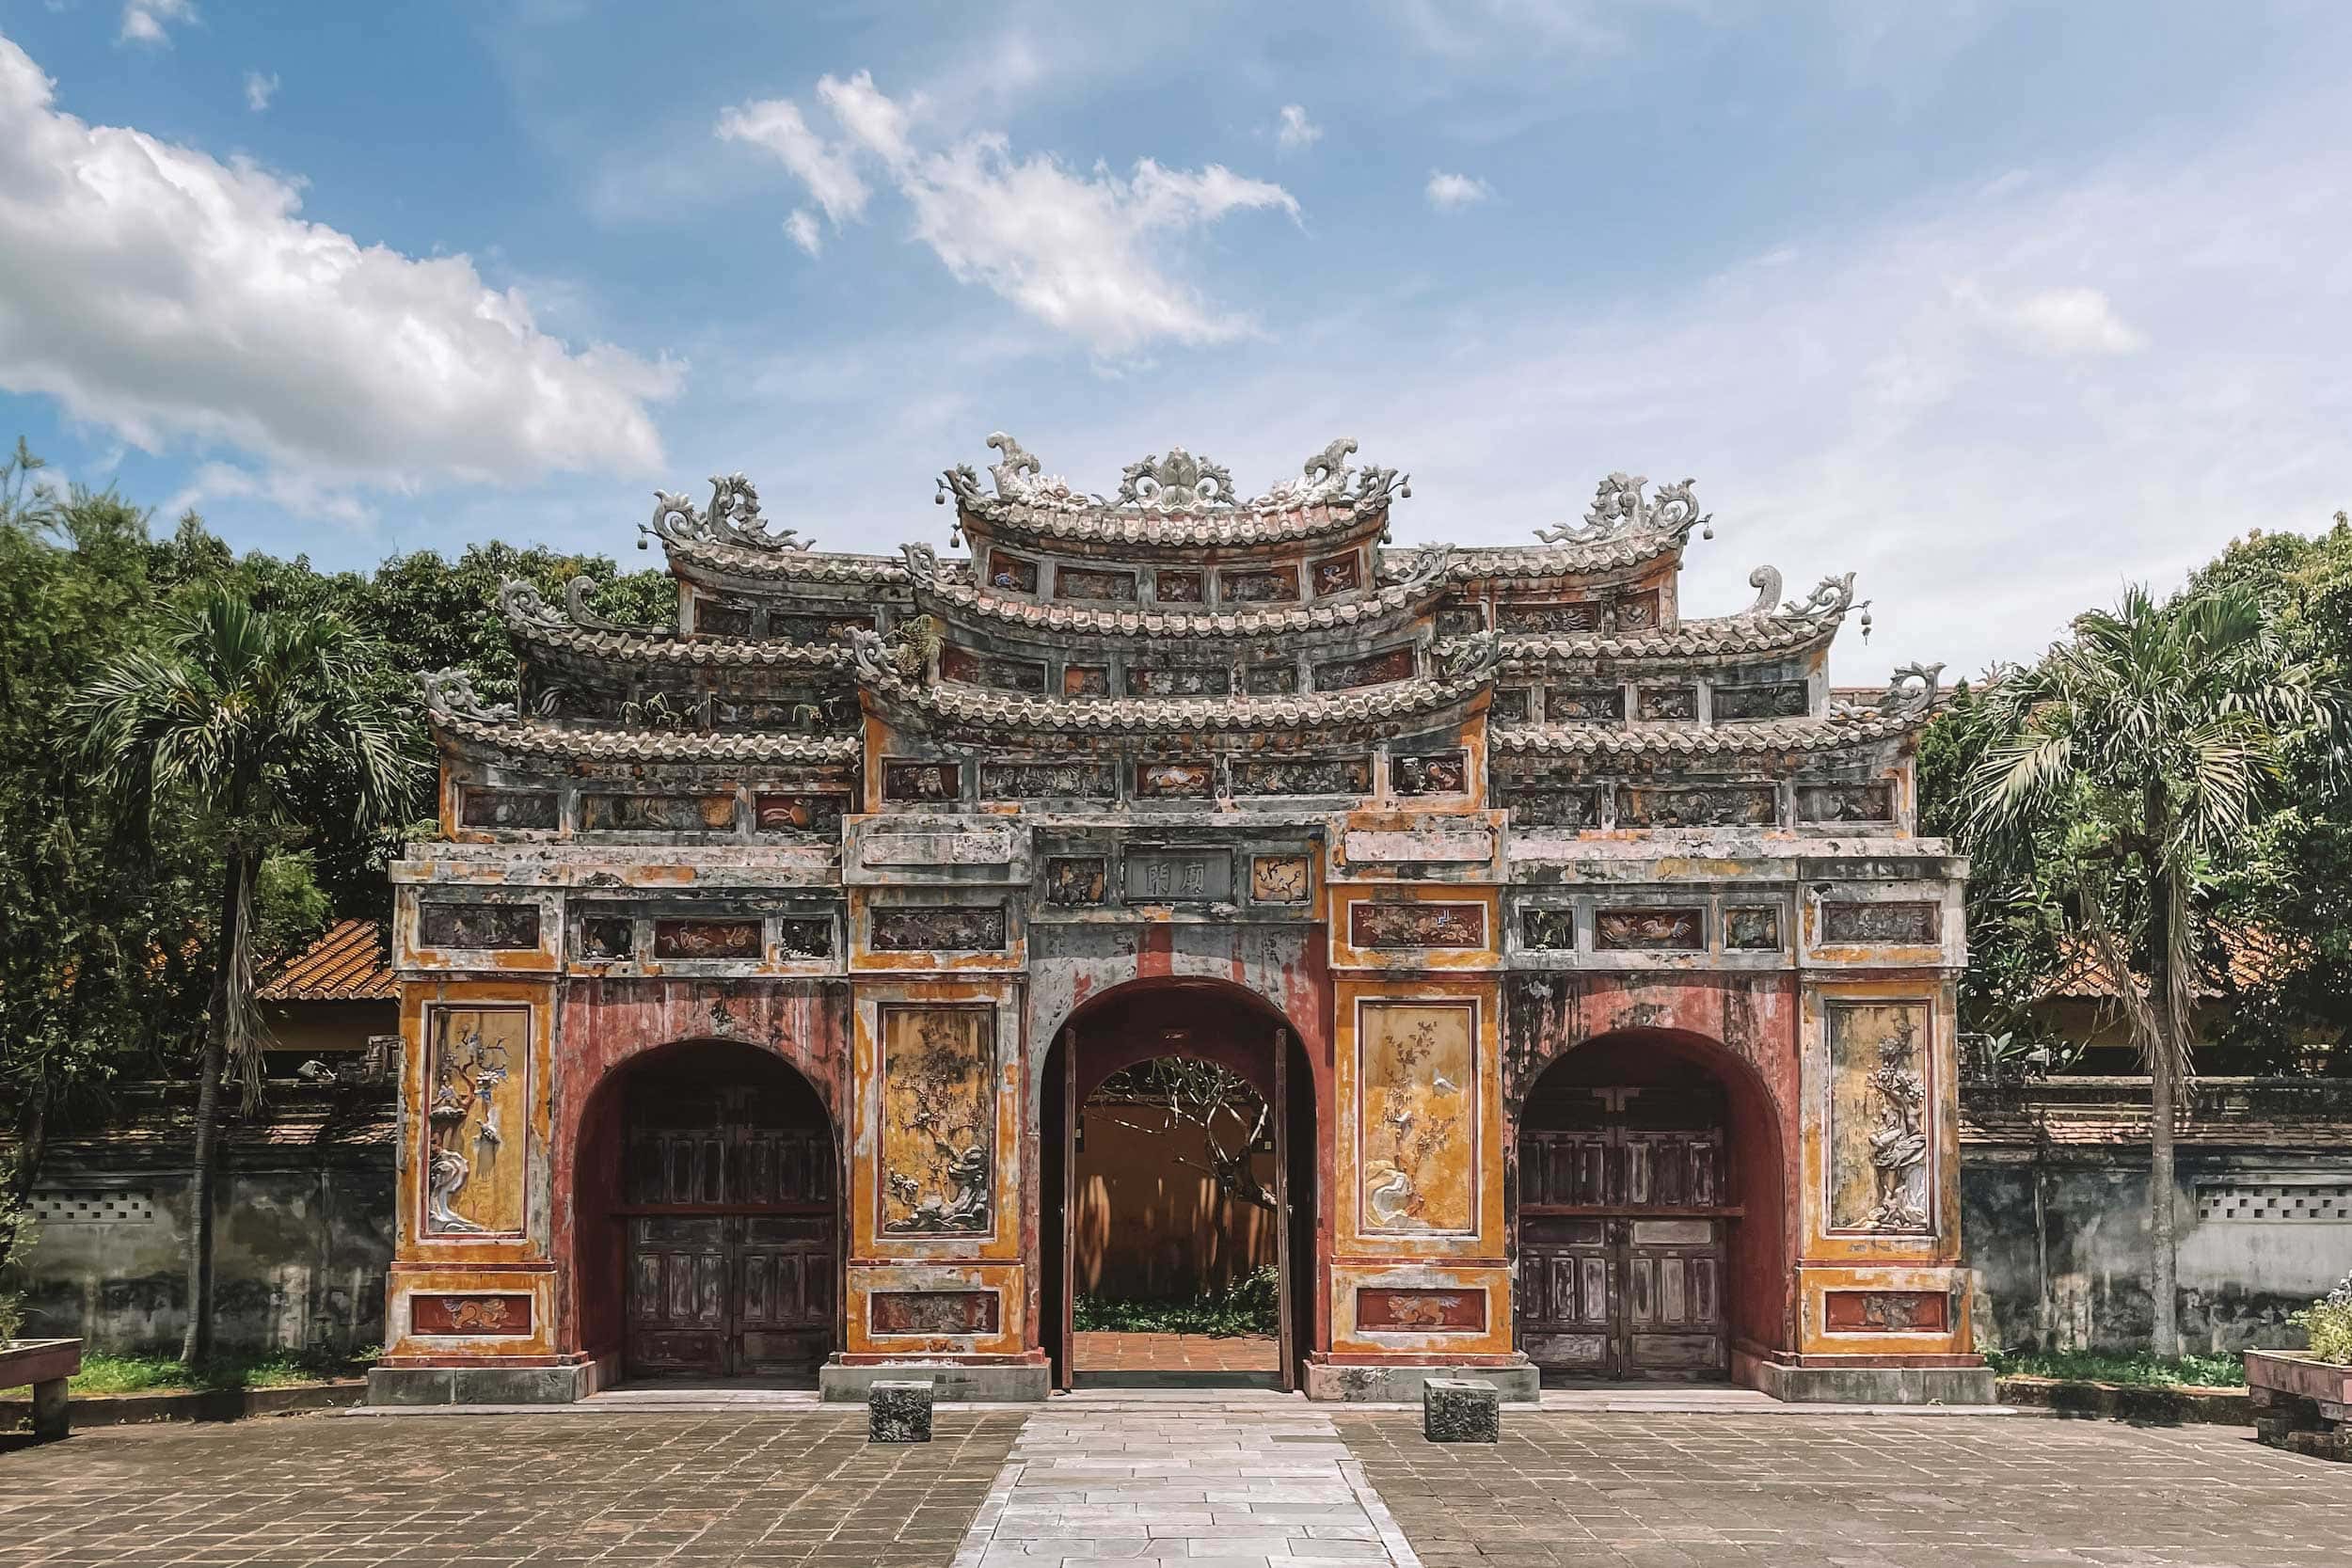 https://aworldtolive.com/wp-content/uploads/2023/02/The-Imperial-City-of-Hue-PS.jpg